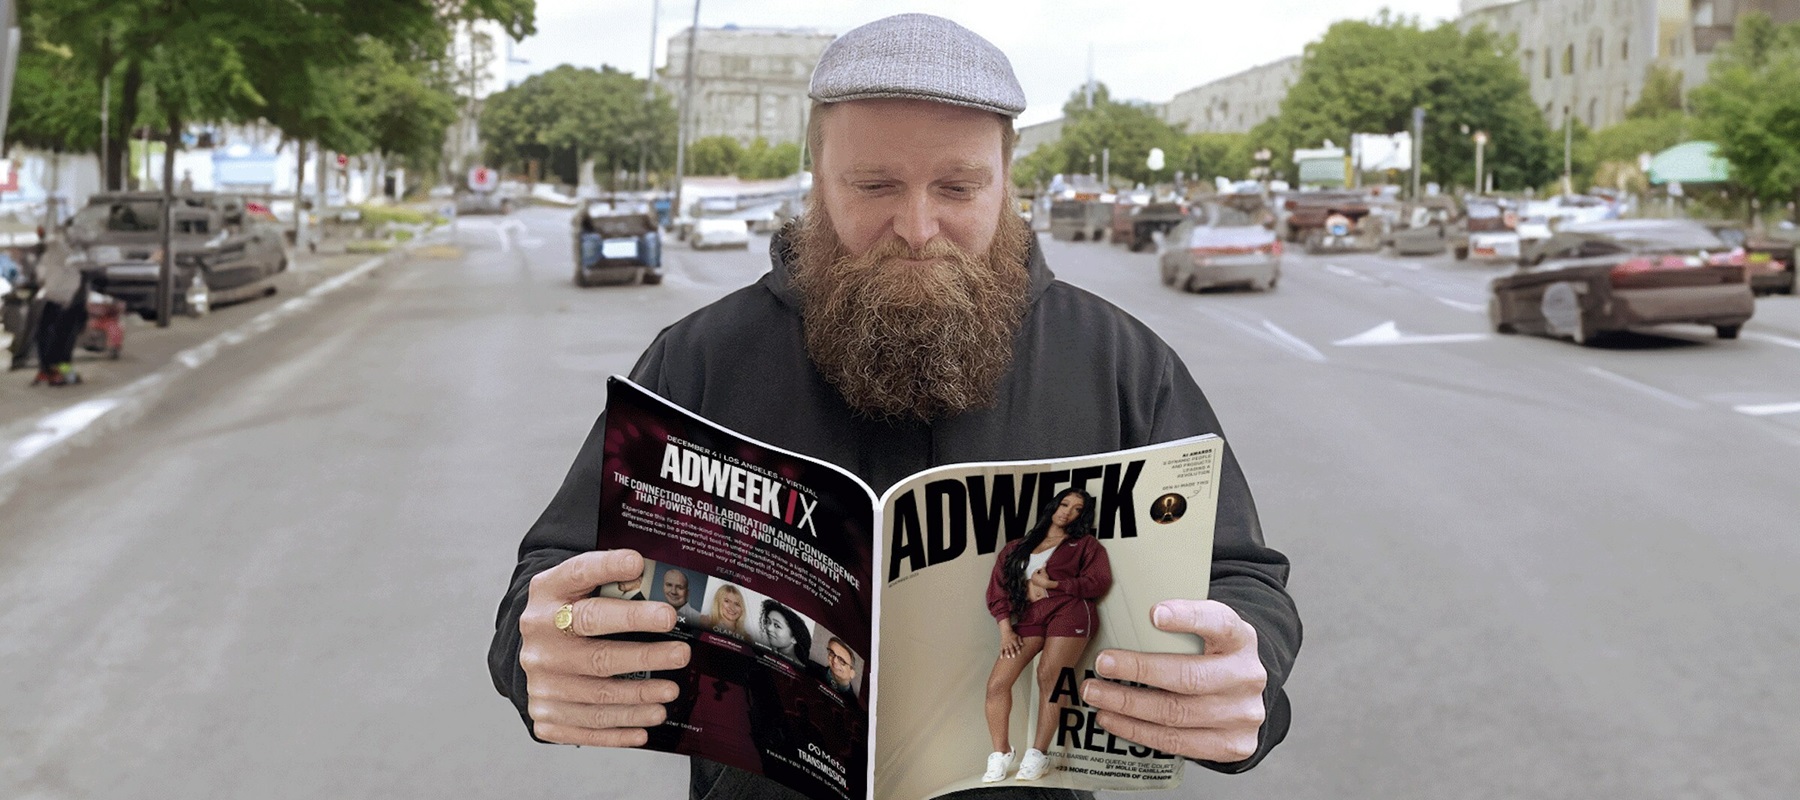 Media.Monks named Adweek's inaugural AI agency of the year